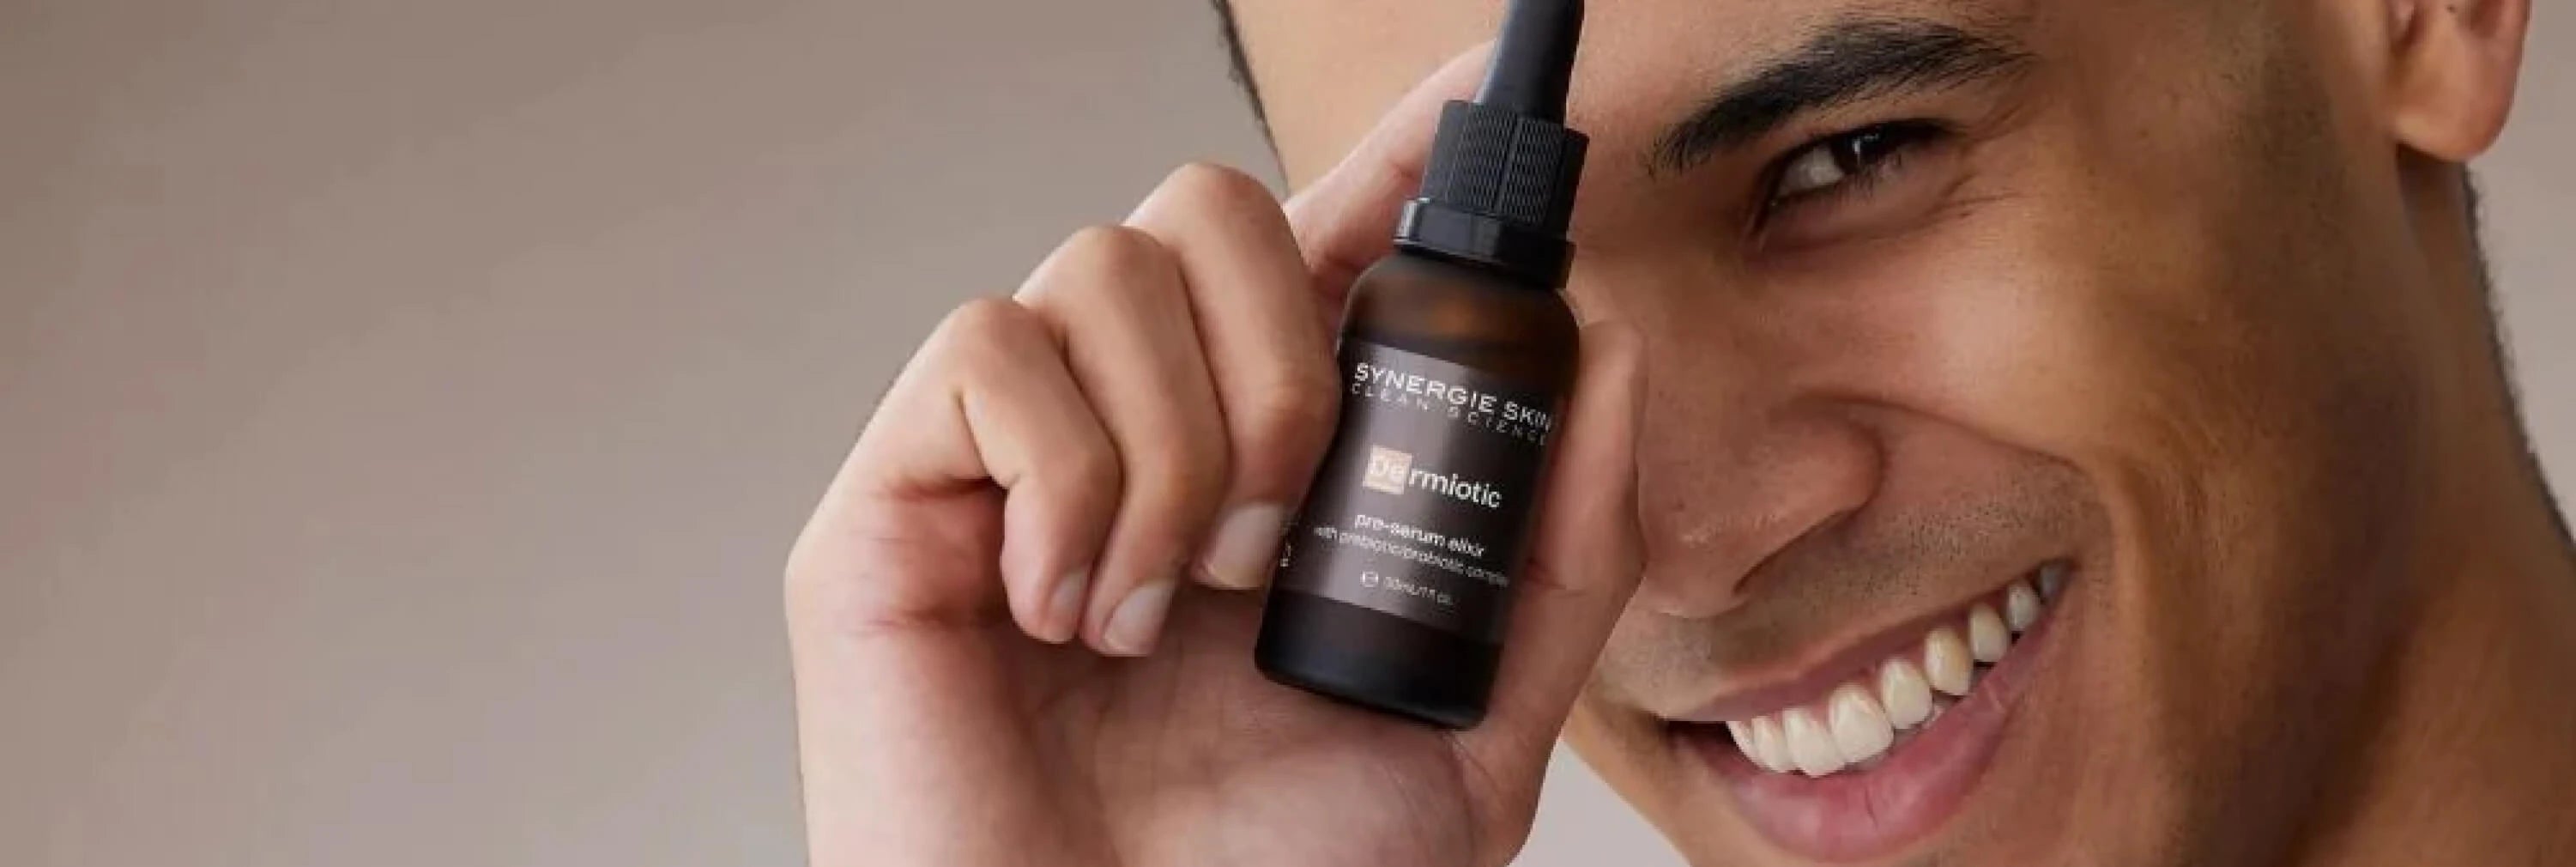 Skincare model holding Synergie Skin's Dermiotic near face